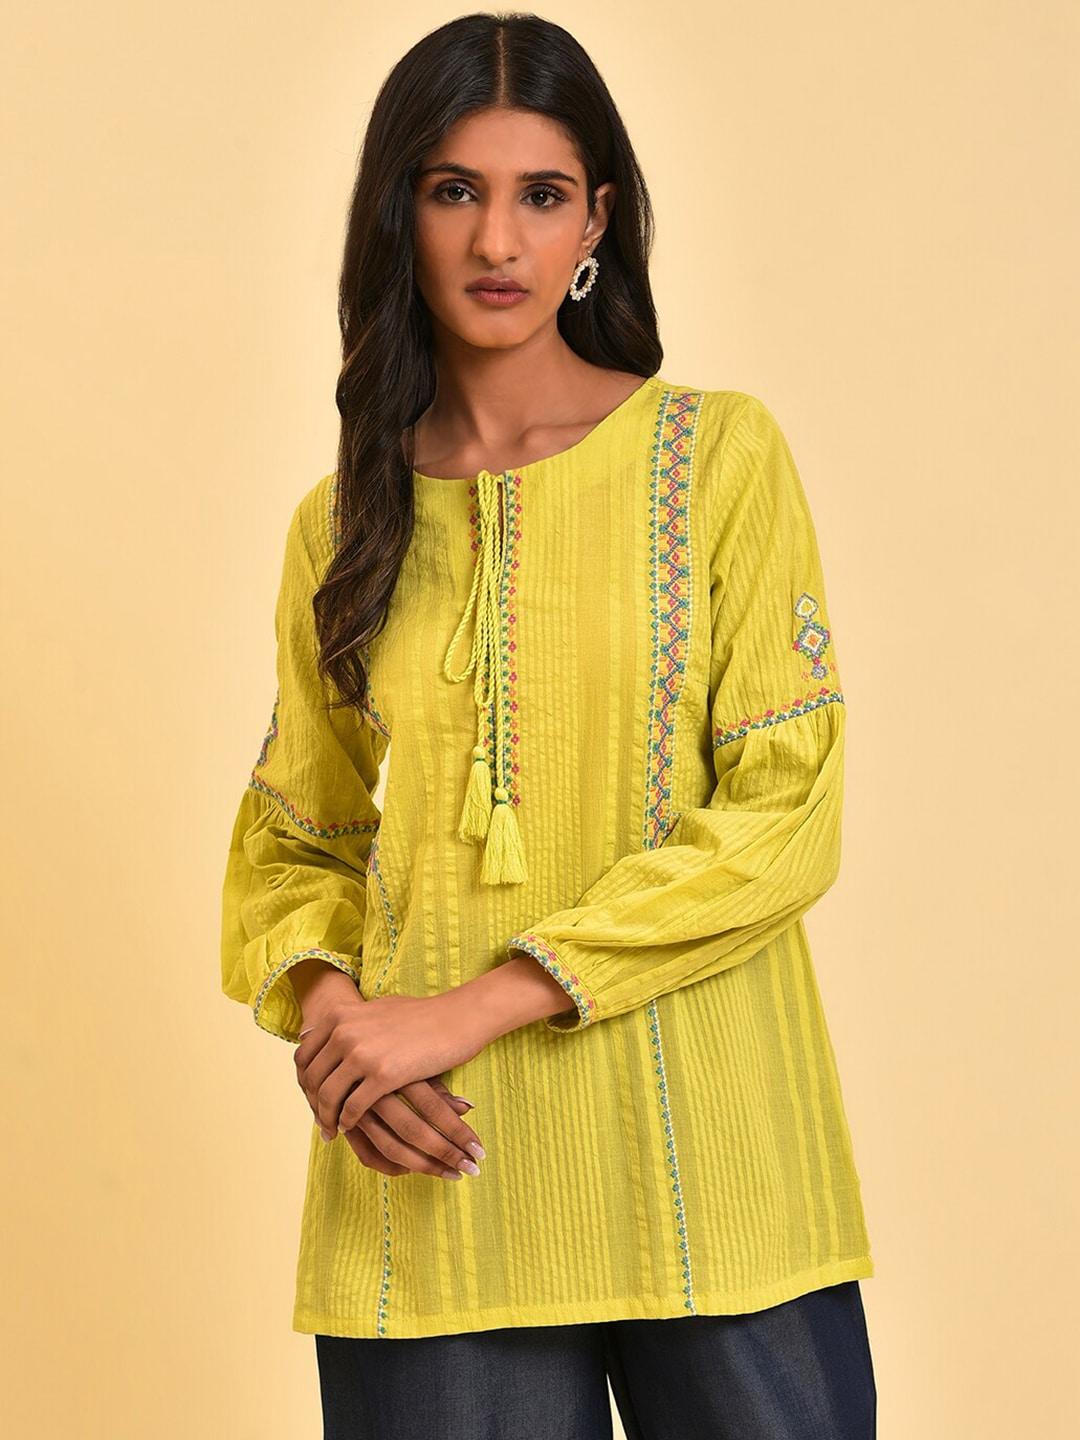 w-yellow-self-designed-ethnic-motifs-embroidered-tie-up-neck-cotton-top